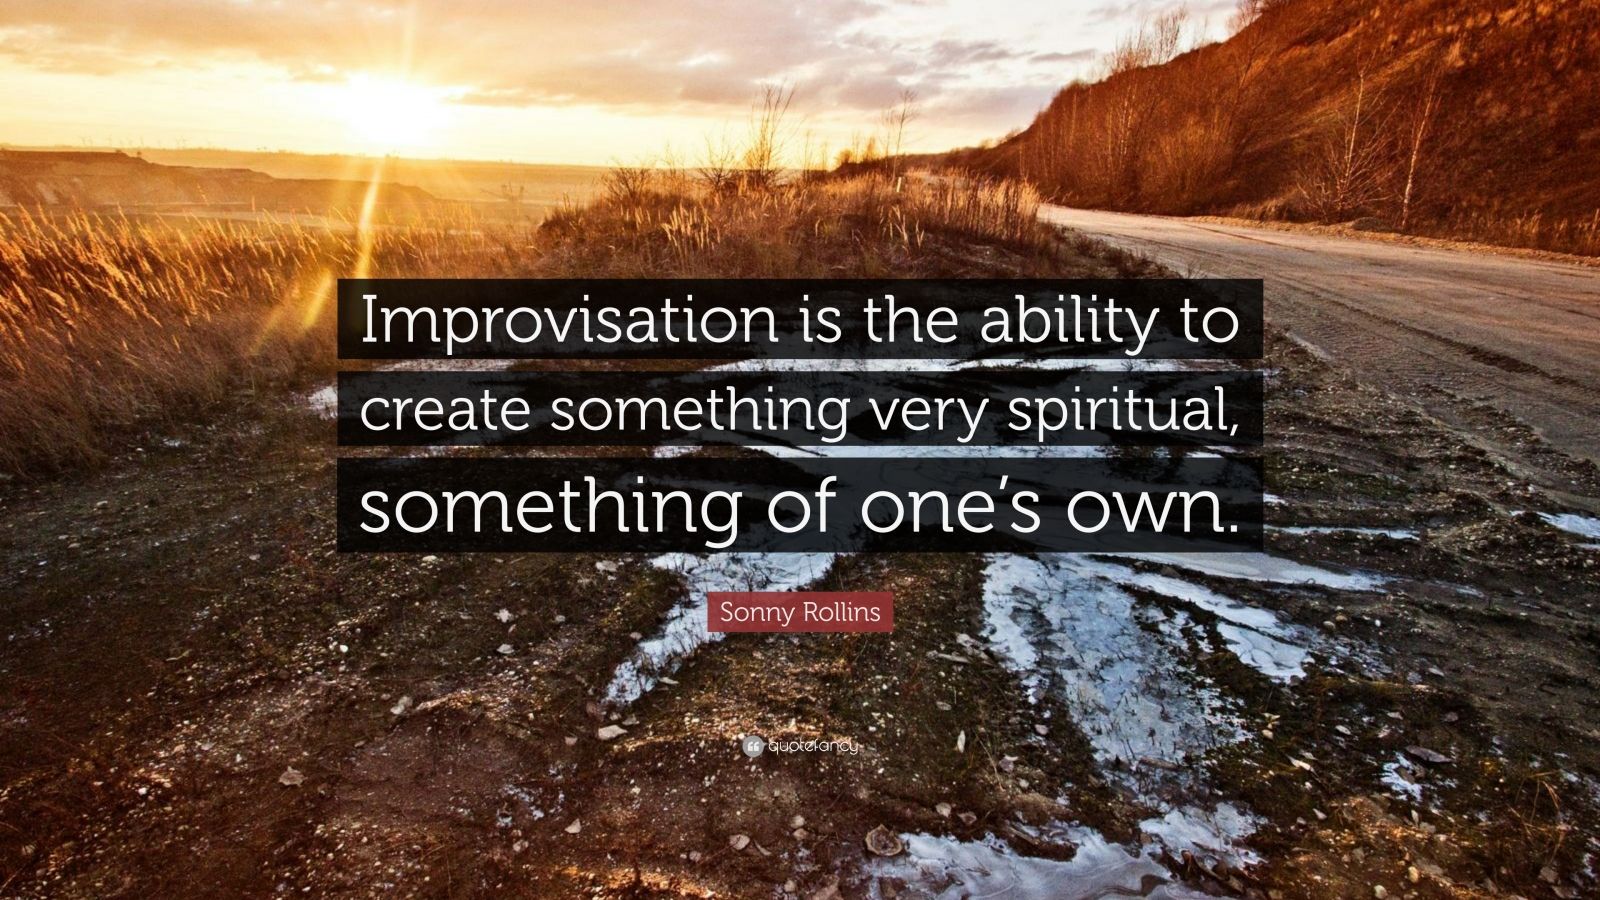 Sonny Rollins Quote: "Improvisation is the ability to create something very spiritual, something ...